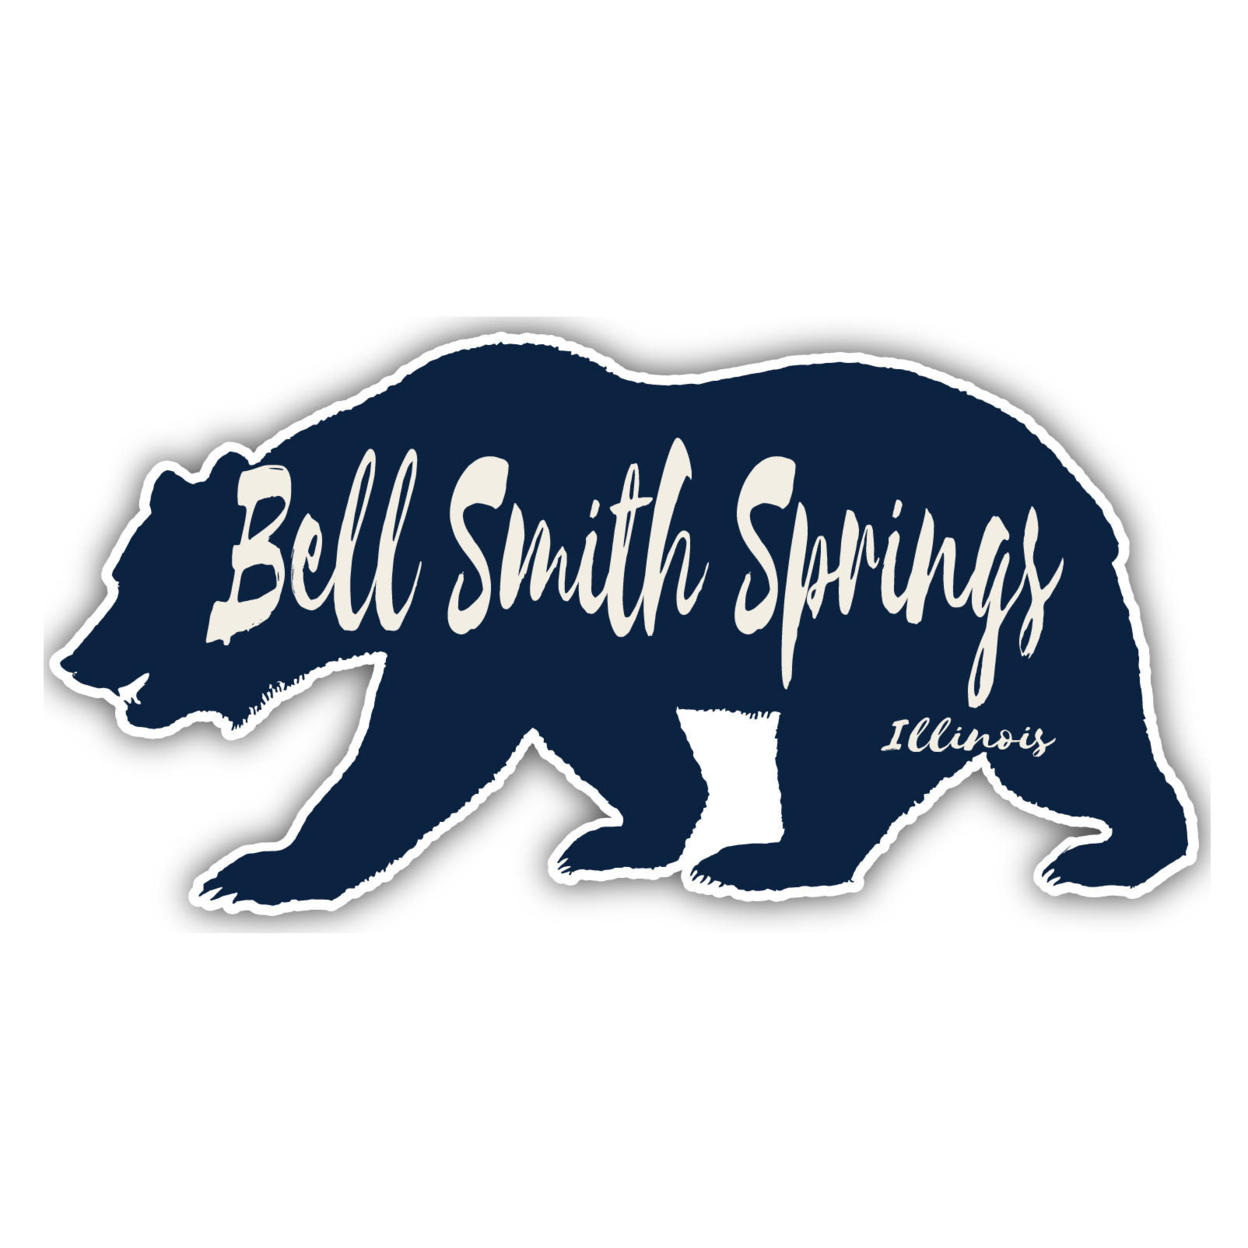 Bell Smith Springs Illinois Souvenir Decorative Stickers (Choose Theme And Size) - Single Unit, 4-Inch, Bear